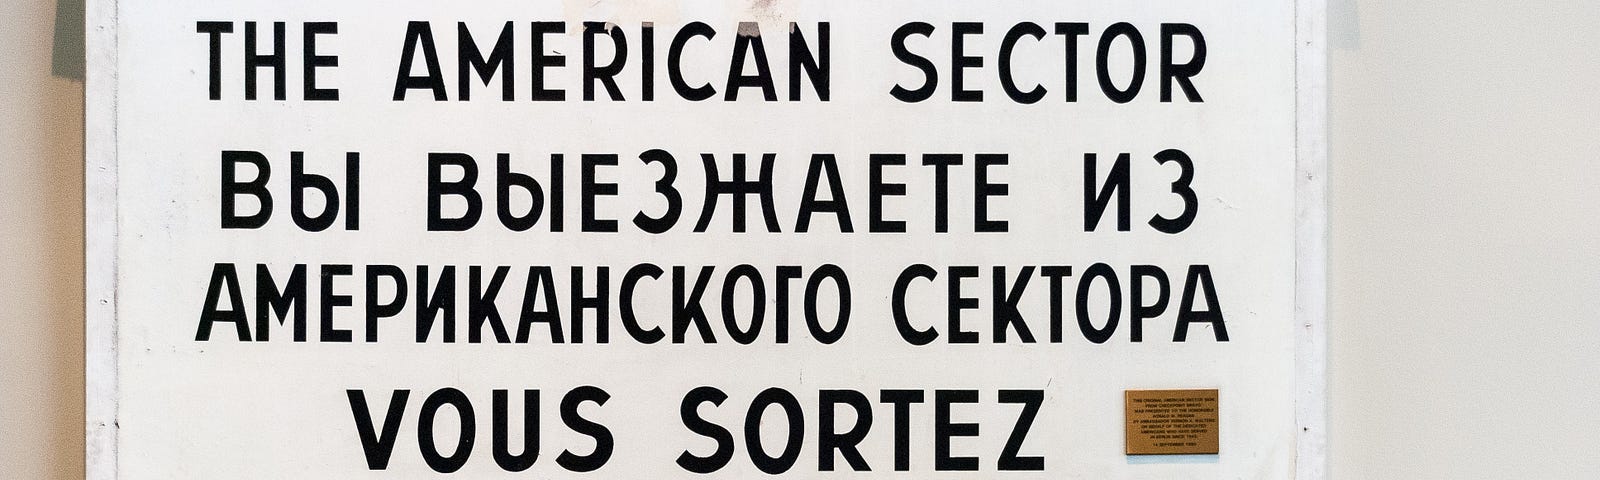 The old sign from West Berlin that says “You are leaving the American sector” in Russian, French, English and German.